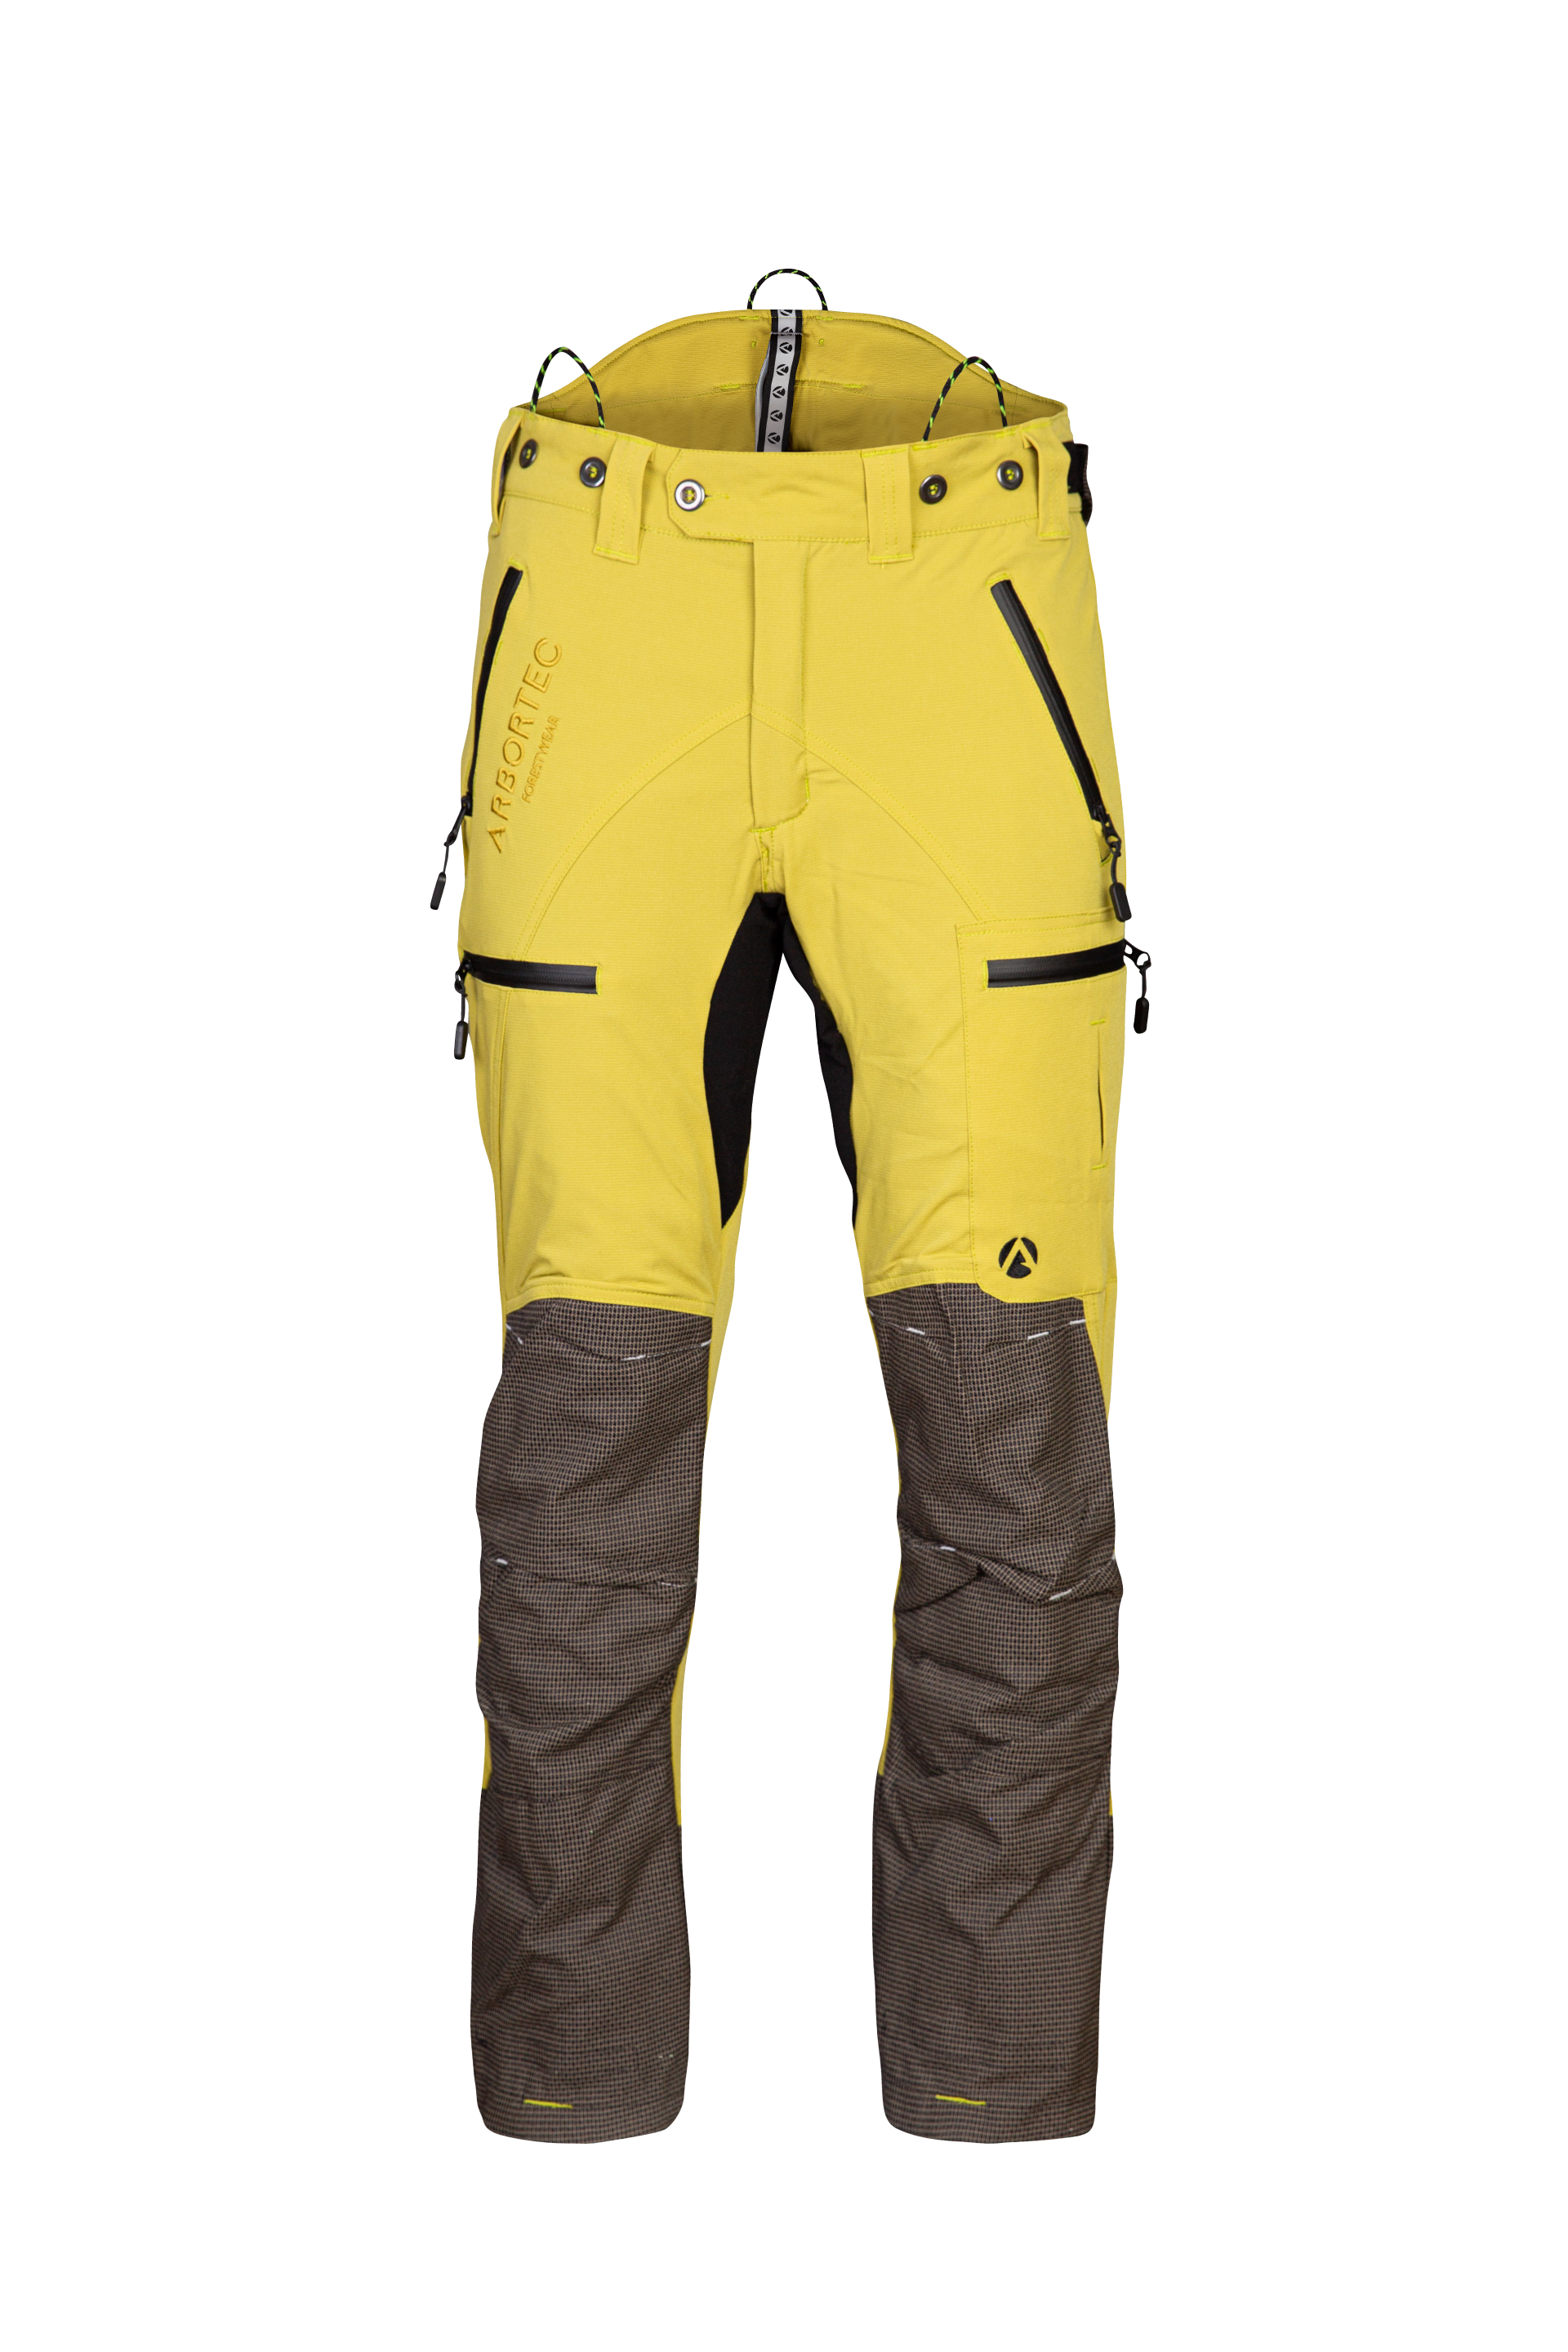 AT4060(US) Breatheflex Pro Chainsaw trousers UL Rated - Citrine